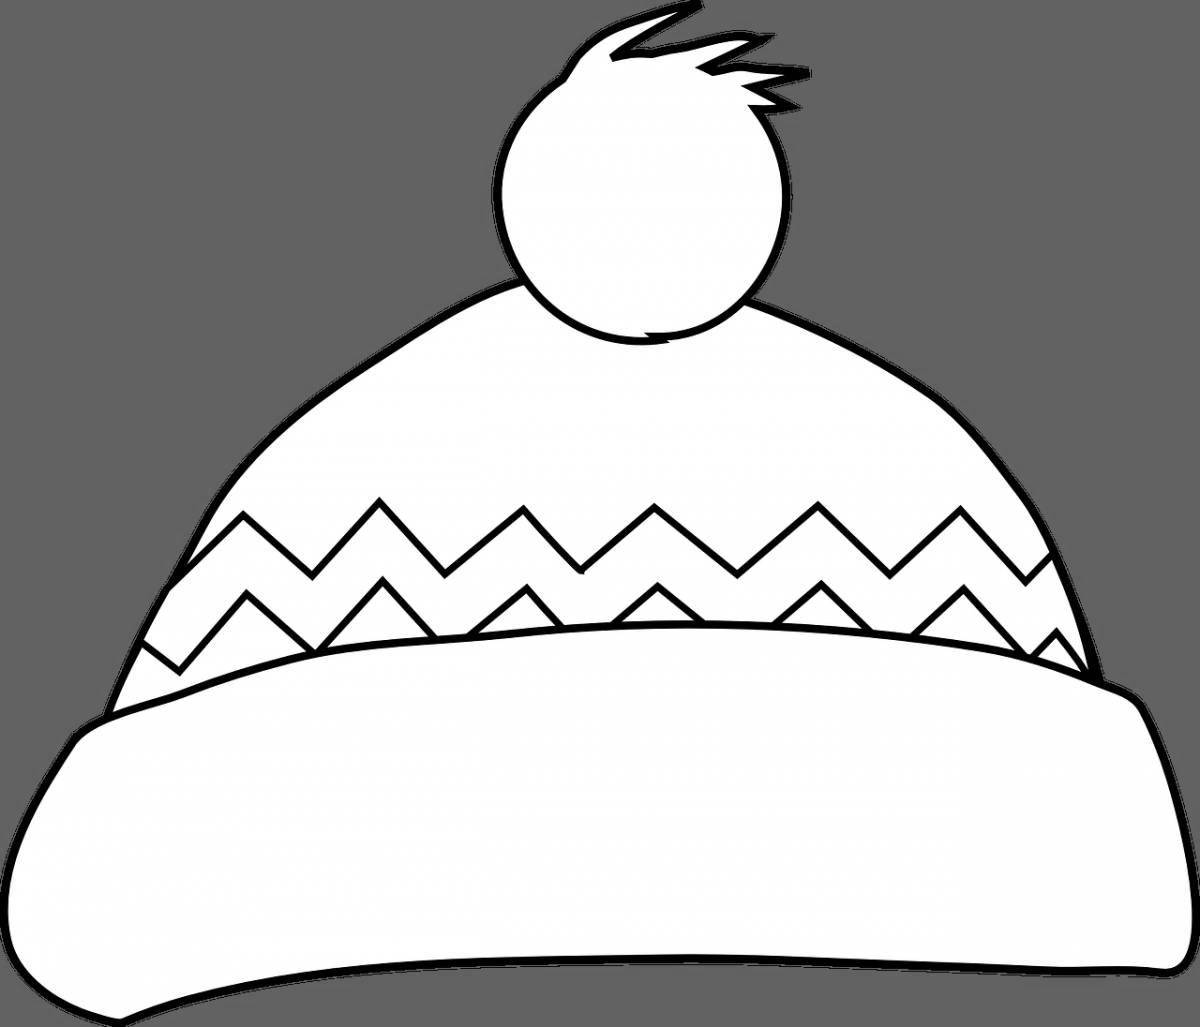 Coloring page shimmery hat and scarf for kids